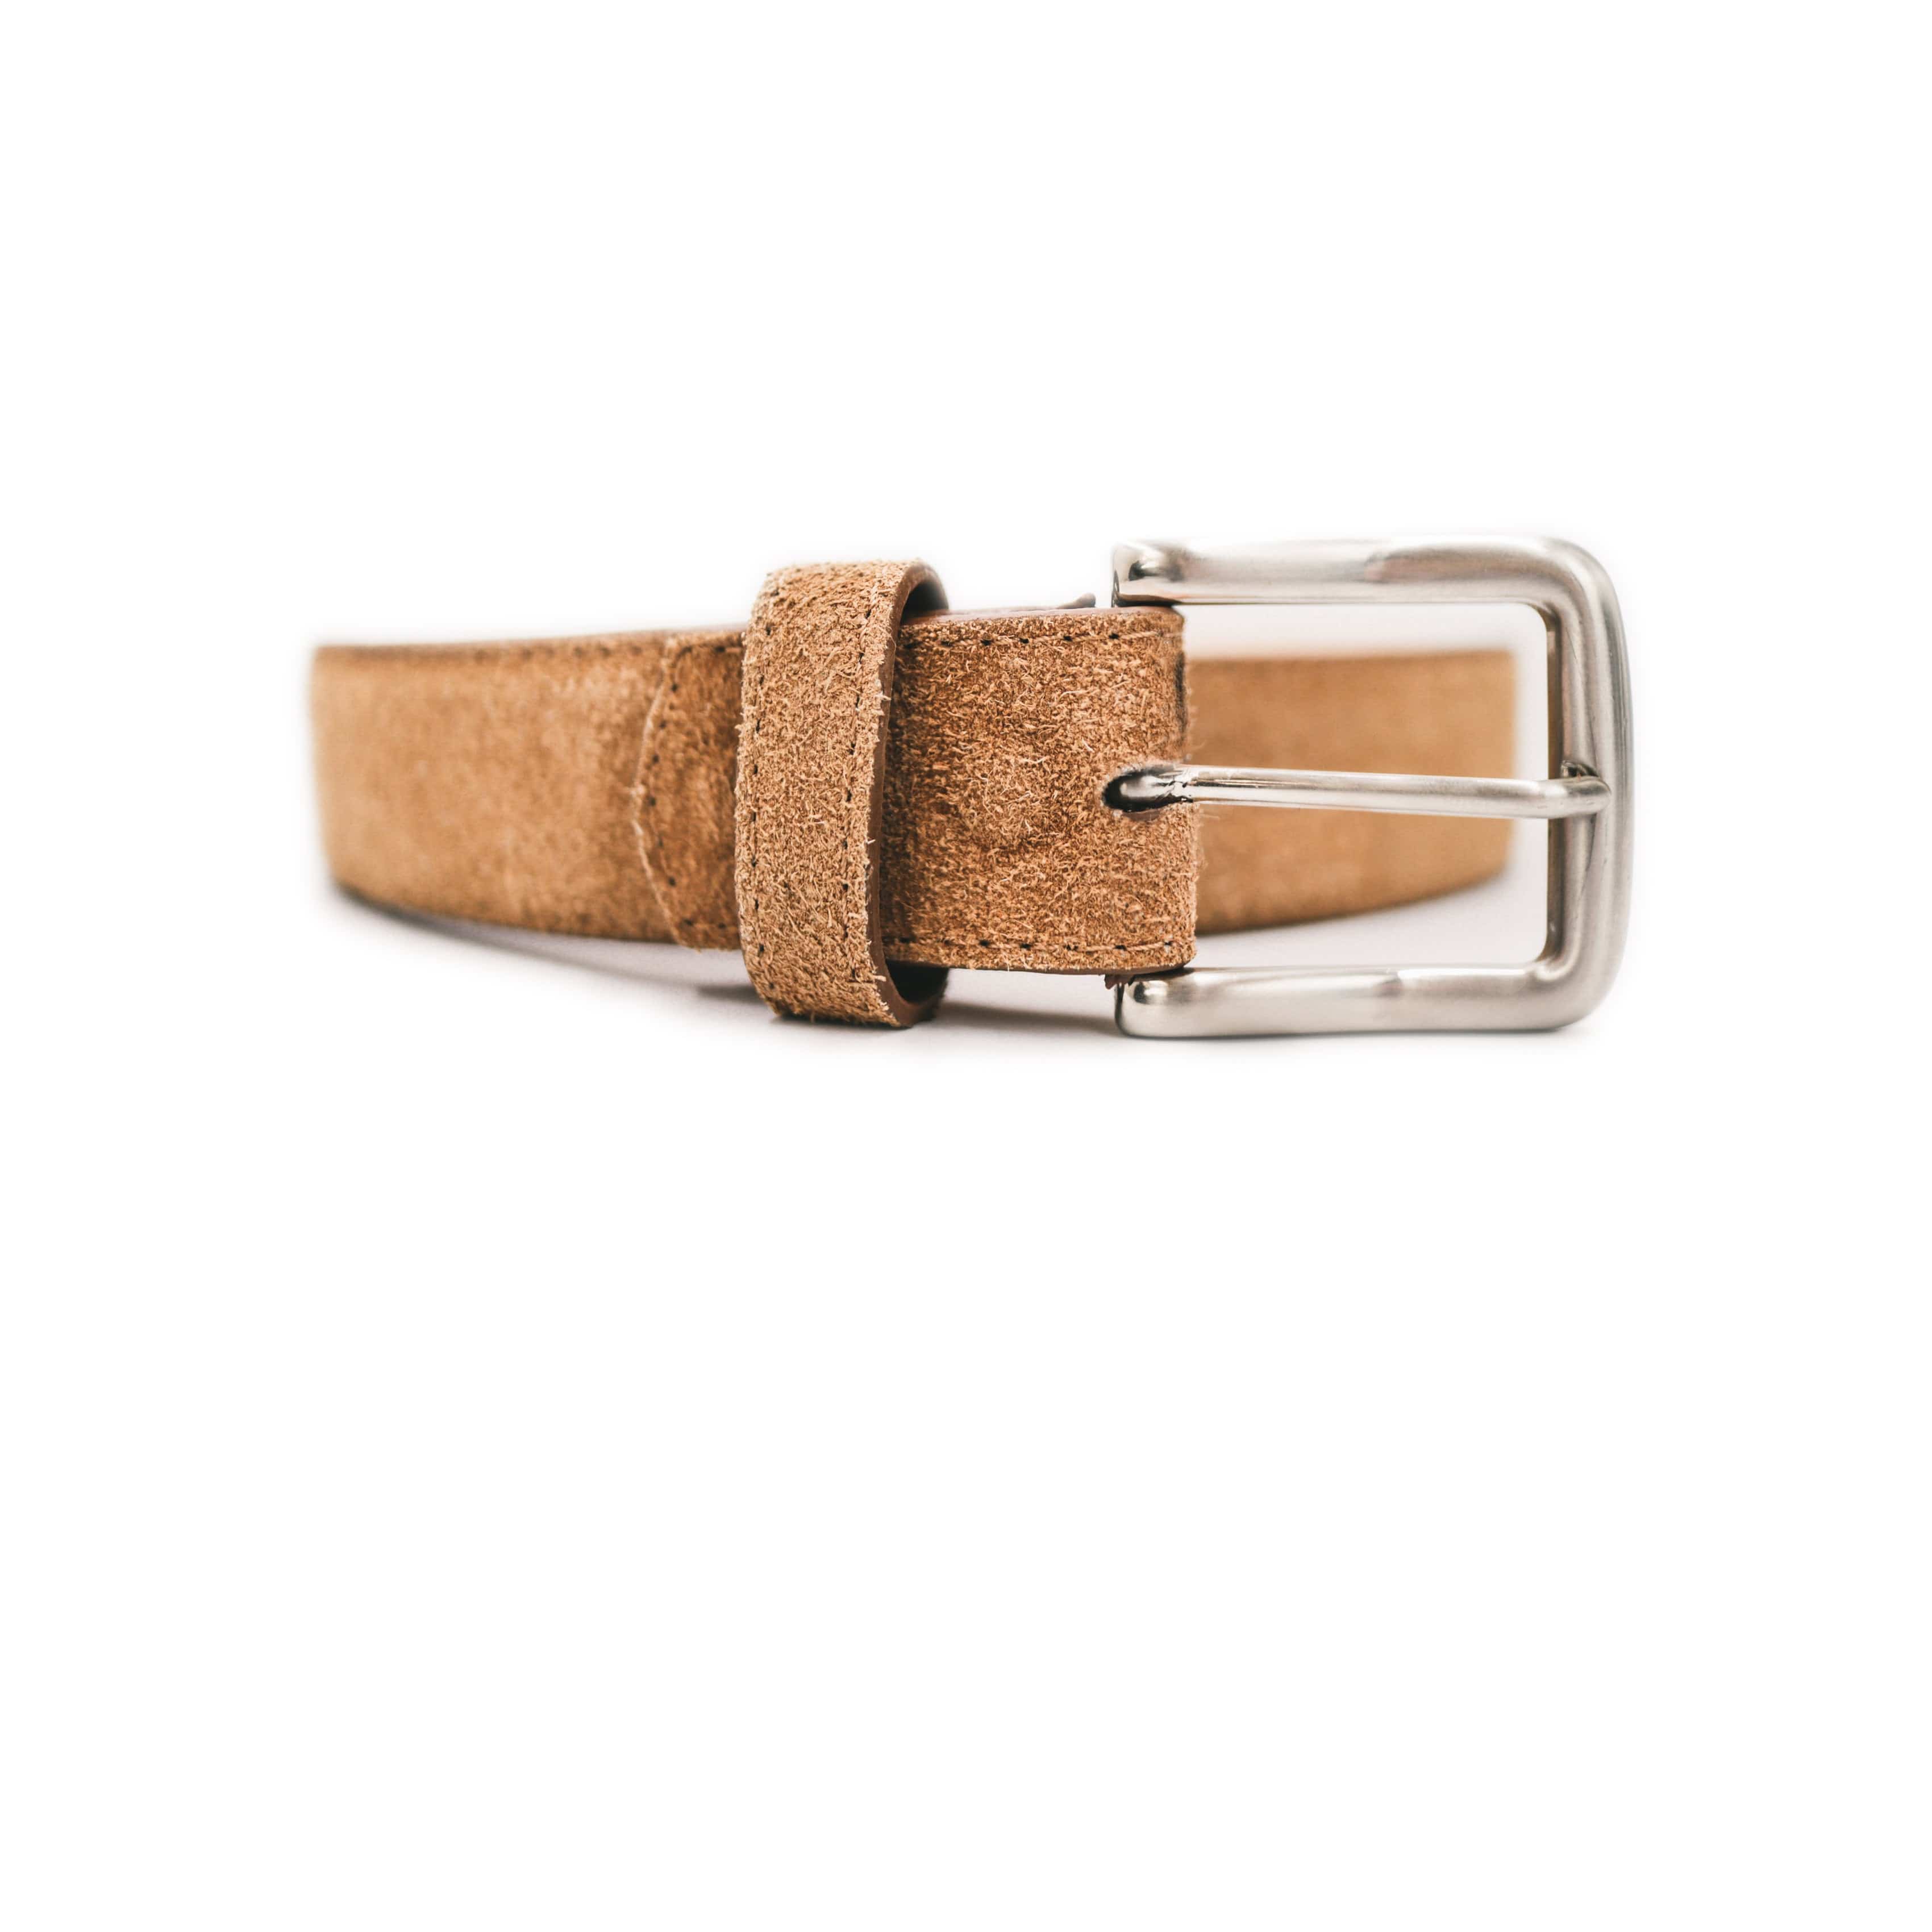 Buy the Best Leather Belts for Women Online from Mochi Shoes